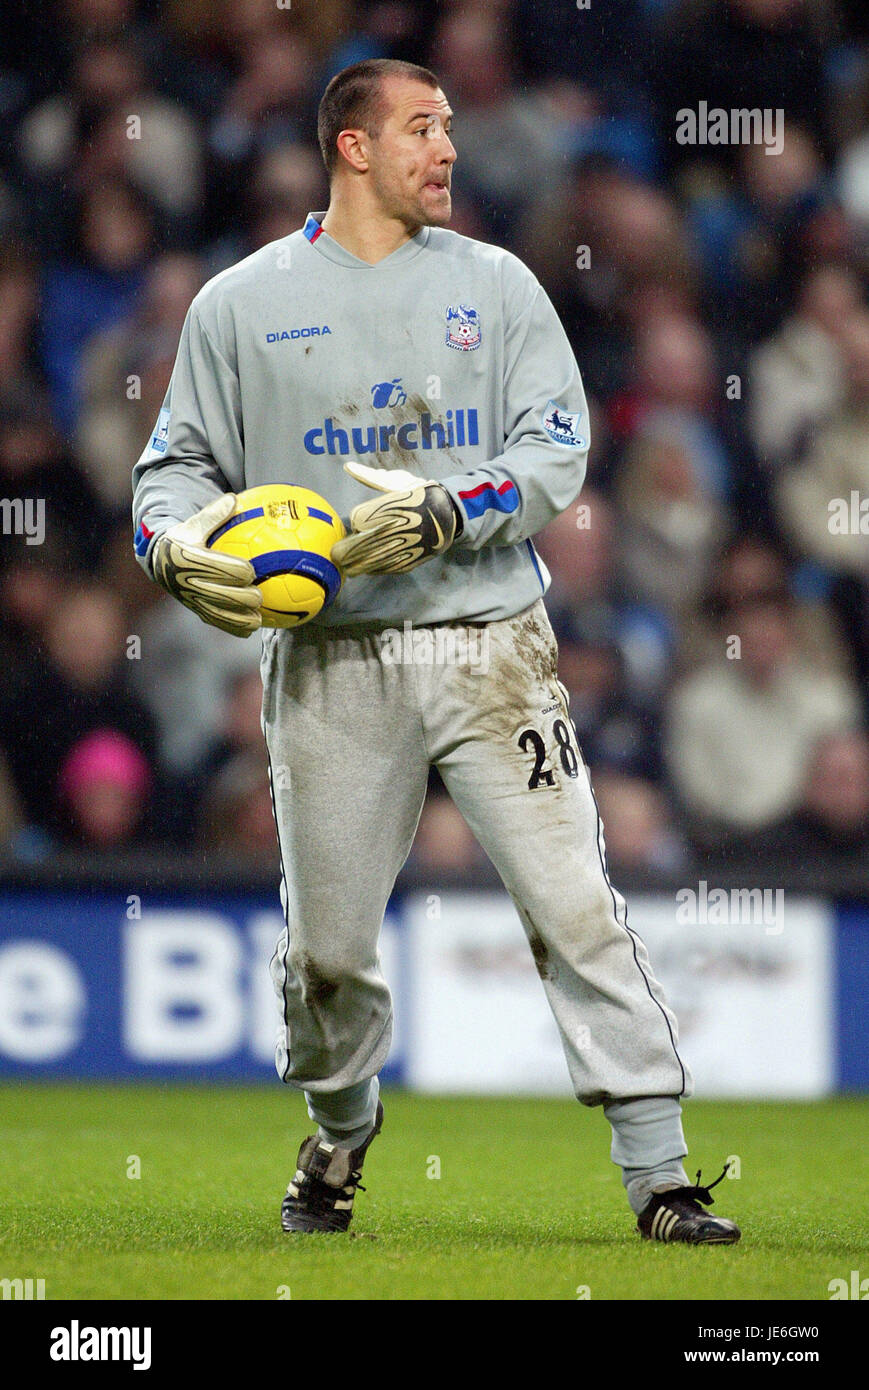 Gabor Kiraly High Resolution Stock Photography and Images - Alamy